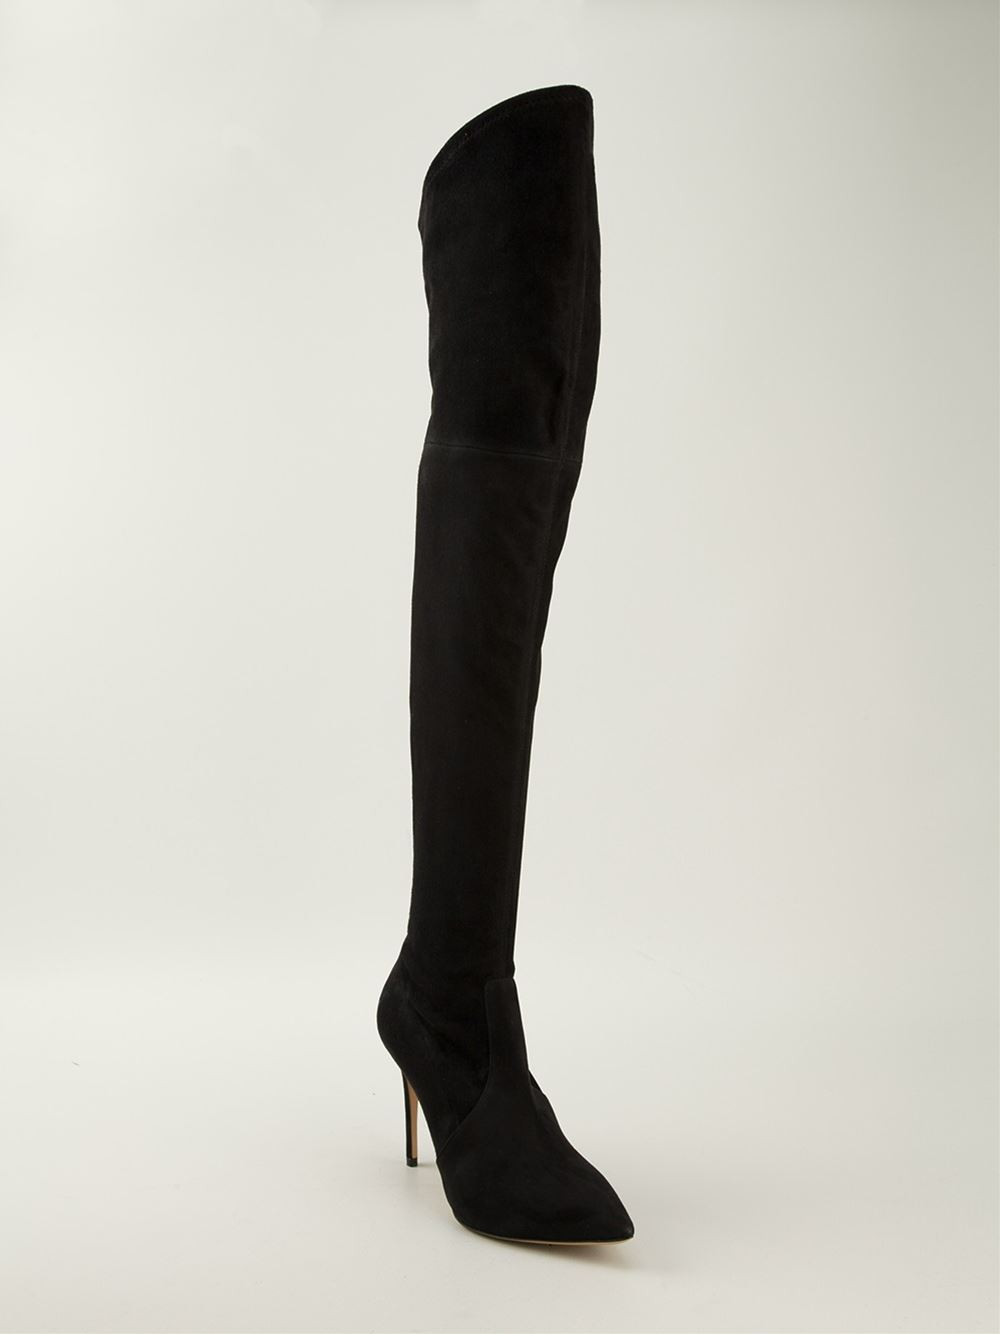 Casadei 'evening' Thigh Length Boots in Black | Lyst